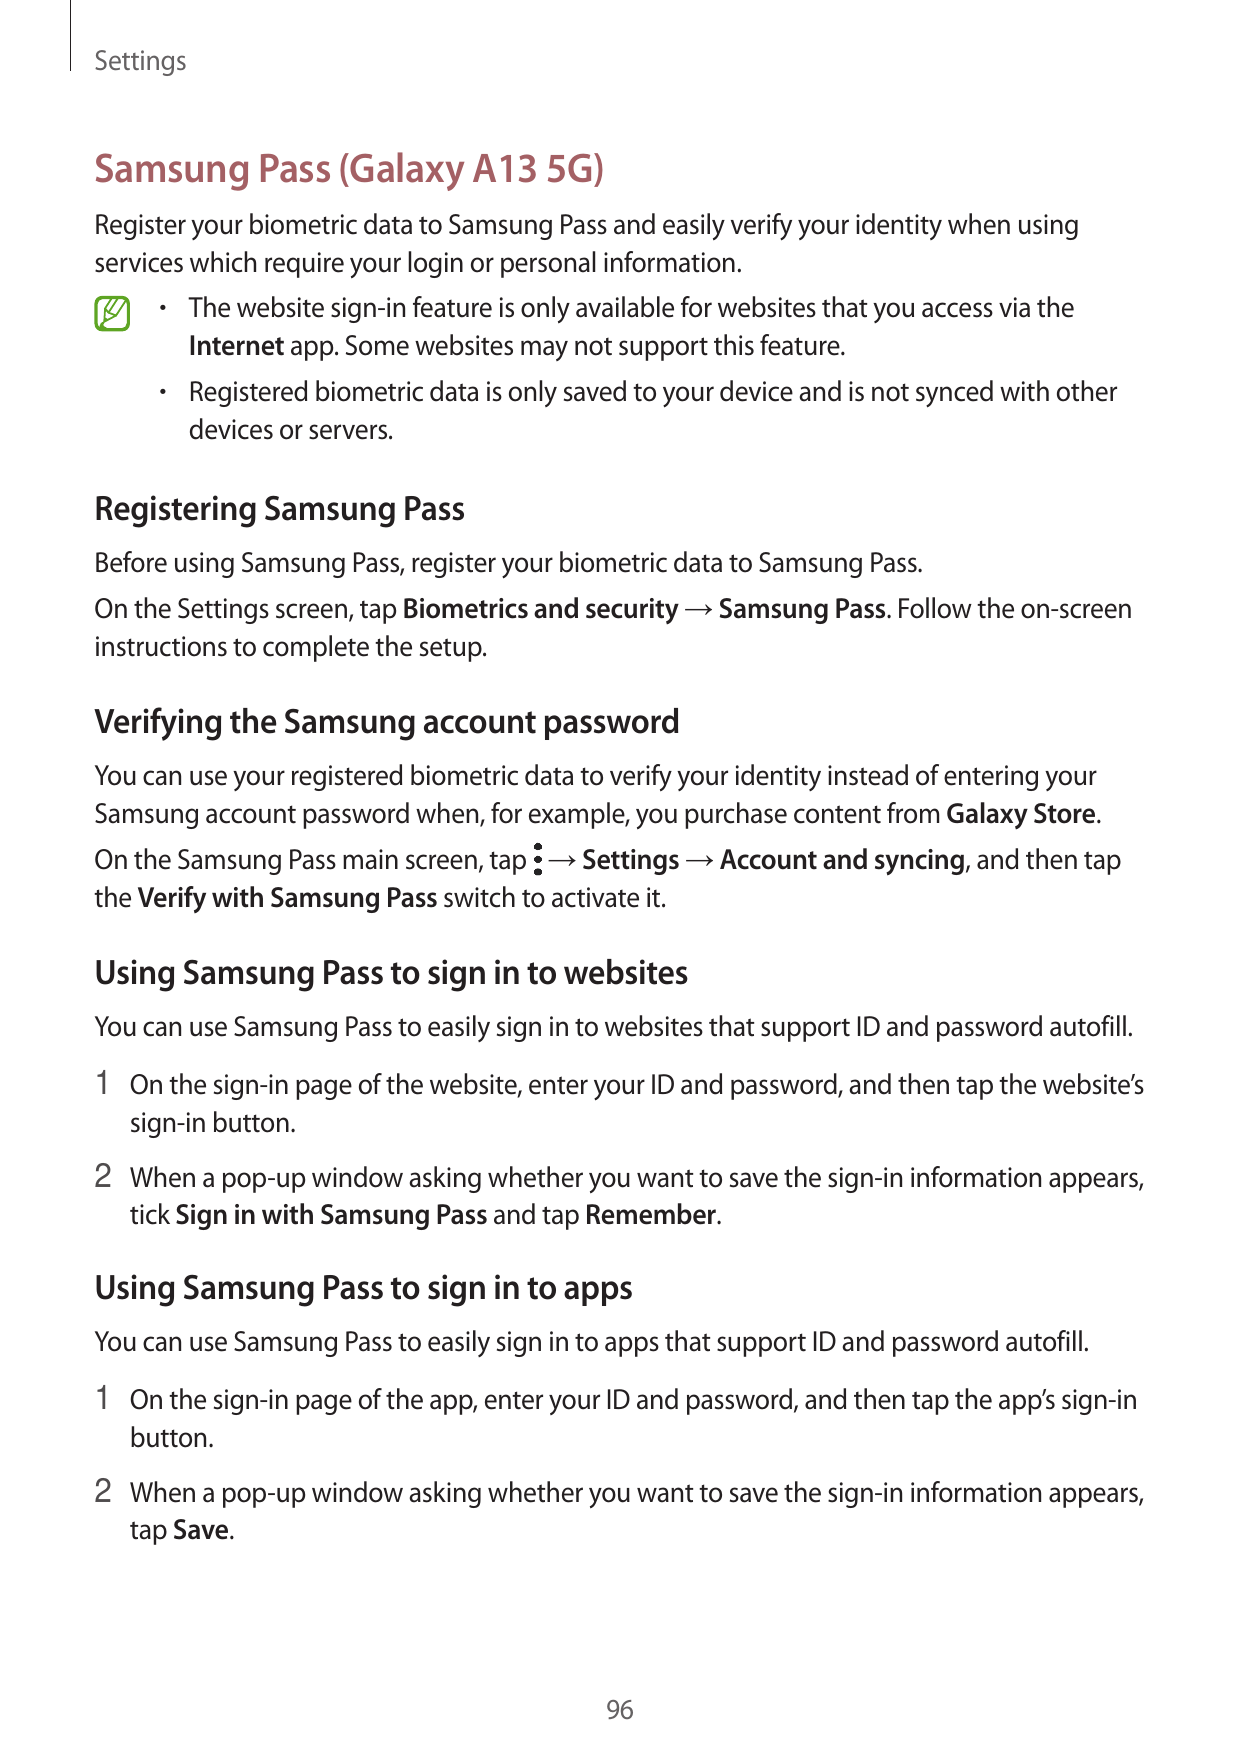 SettingsSamsung Pass (Galaxy A13 5G)Register your biometric data to Samsung Pass and easily verify your identity when usingservi